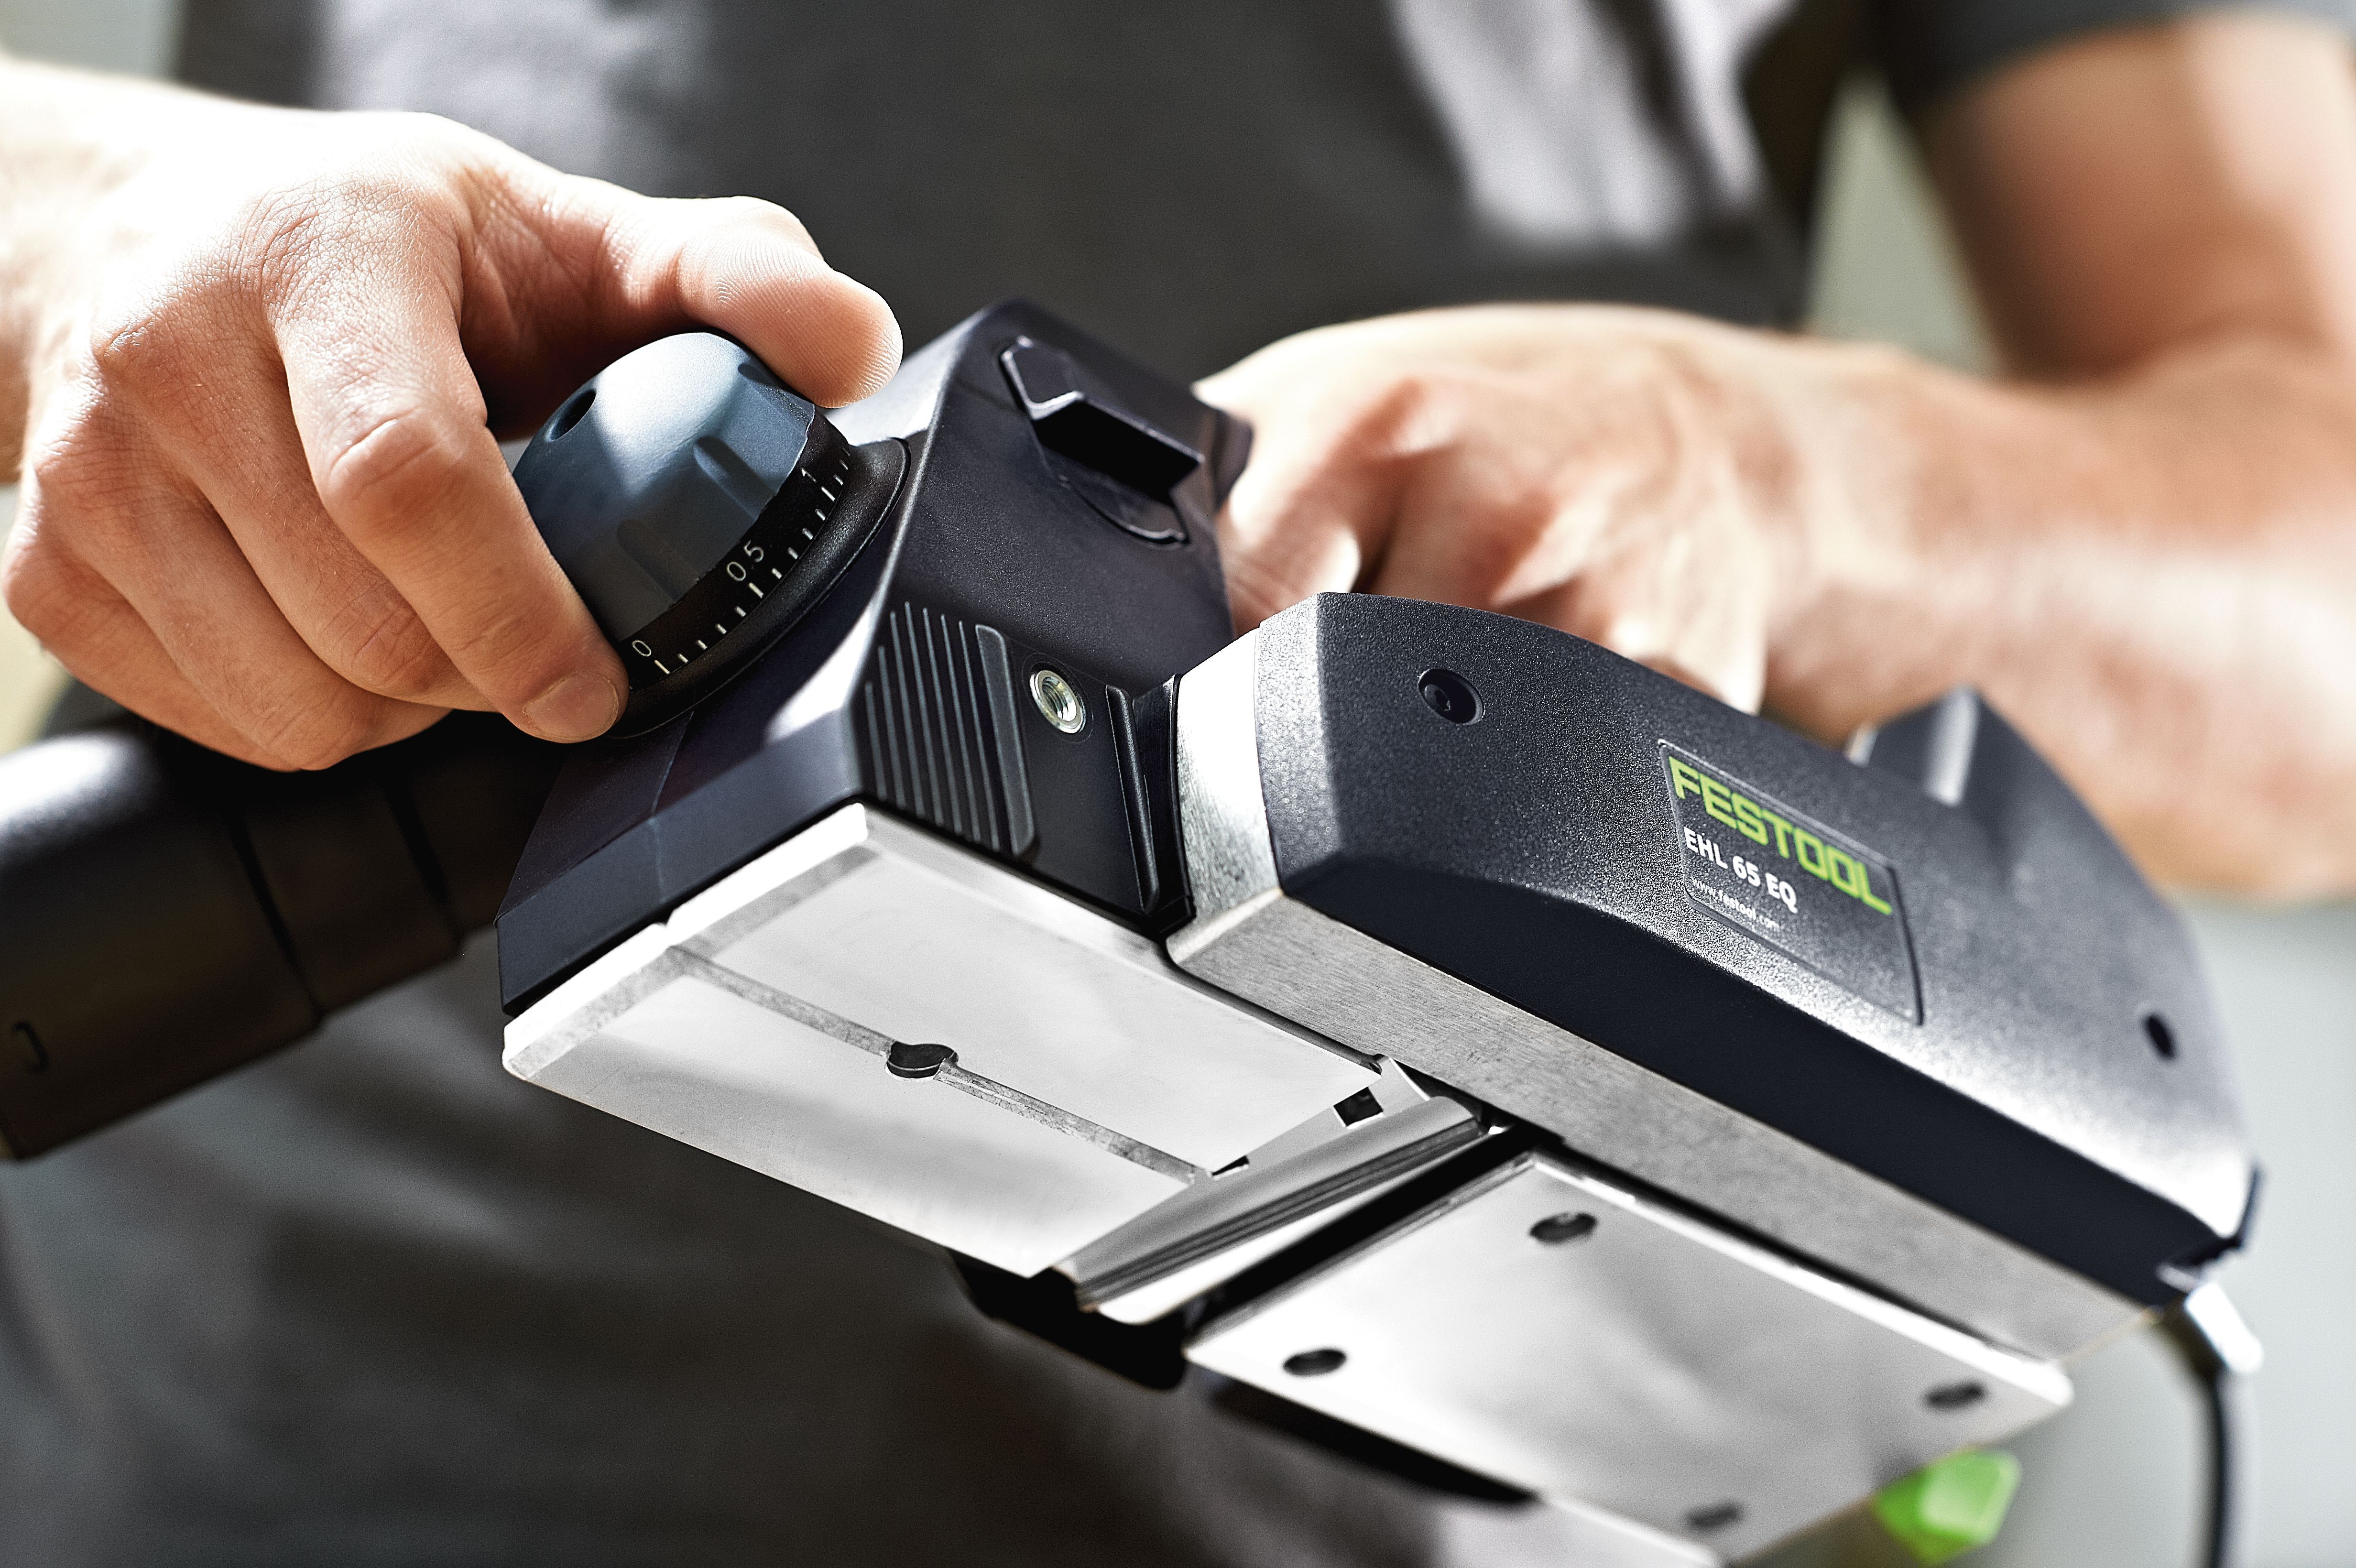 EHL 65mm Single Handed Planer in Systainer 576249 by Festool